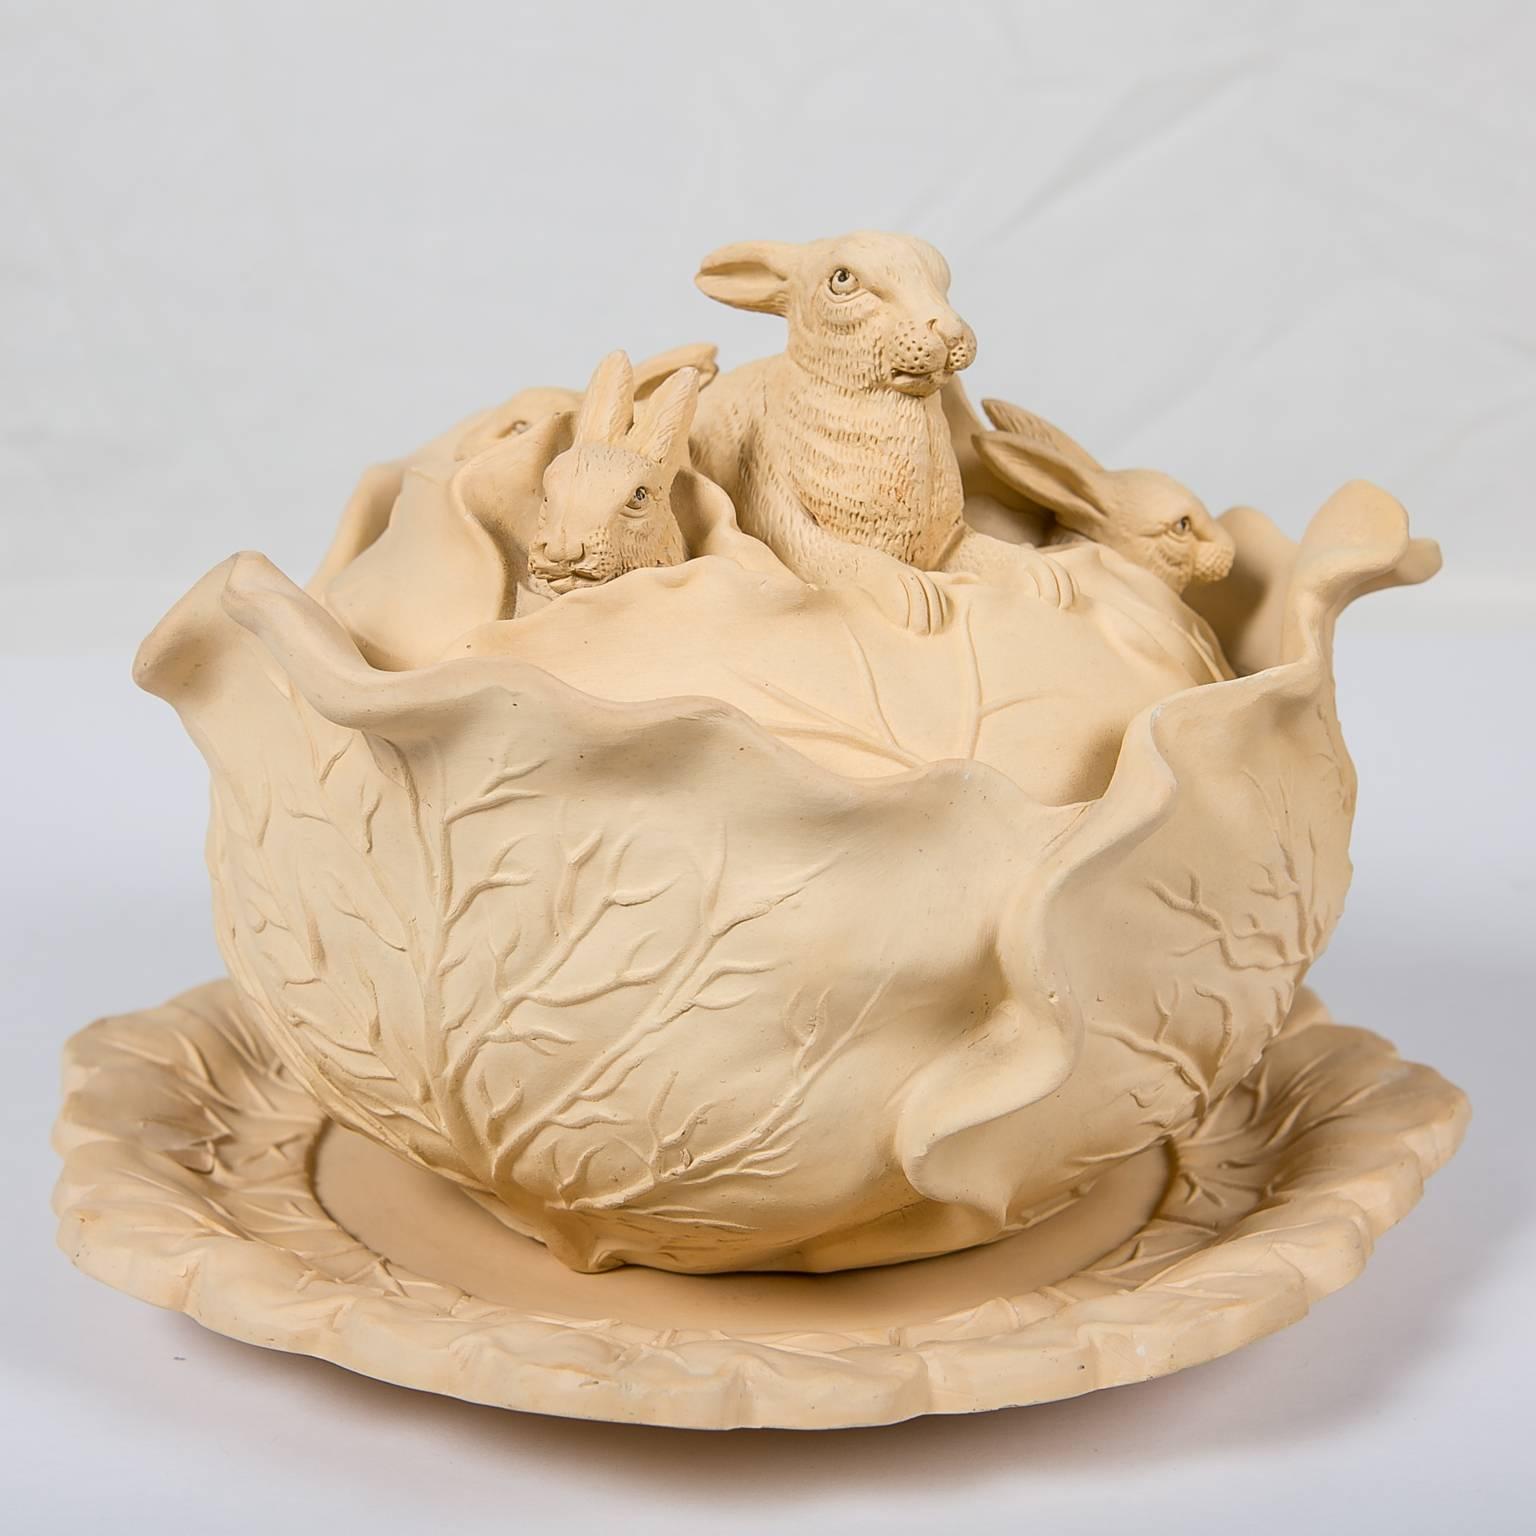 We are pleased to offer this stoneware game pie dish decorated with four rabbits peeking out over the top of a cabbage. The game pie dish was made by William Schiller and Sons circa 1880.
This type of stoneware is known as caneware. Caneware is an